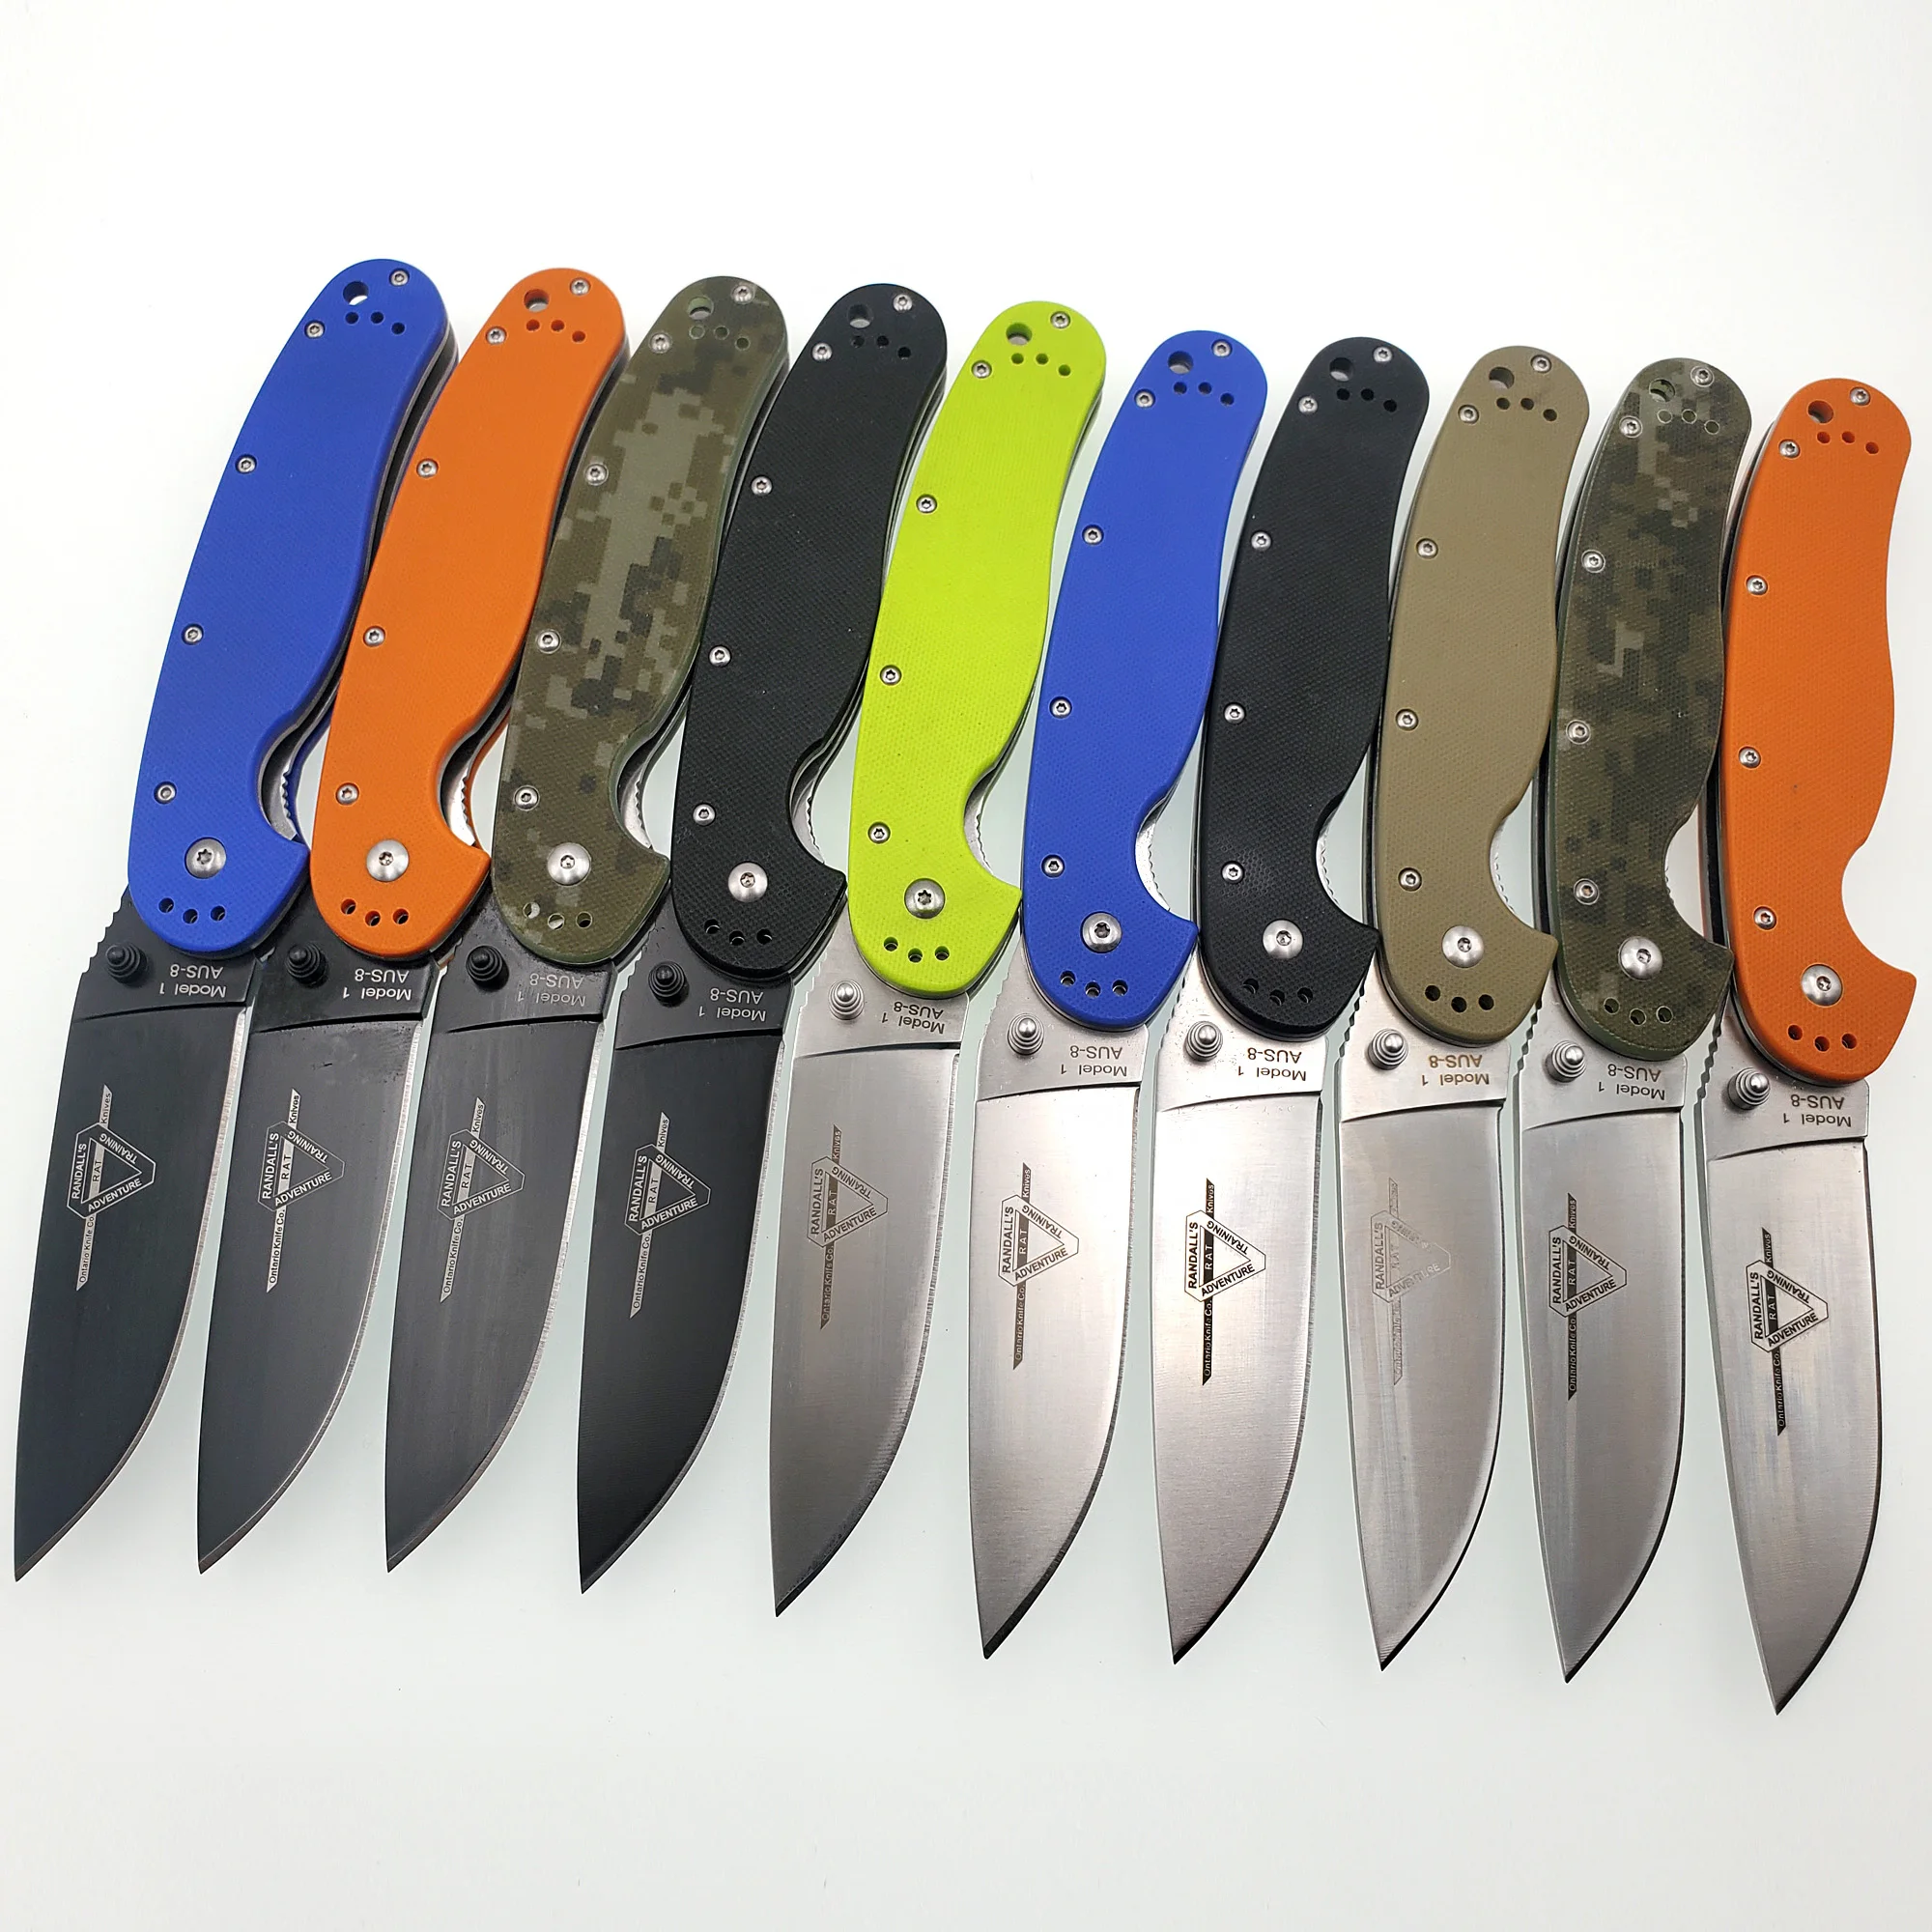 

RAT Model 1 Folding Knife AUS-8 Blade G10 Handle Tactical Camping Pocket Knives Outdoor Survival Rescue Hunting Combat EDC Tool